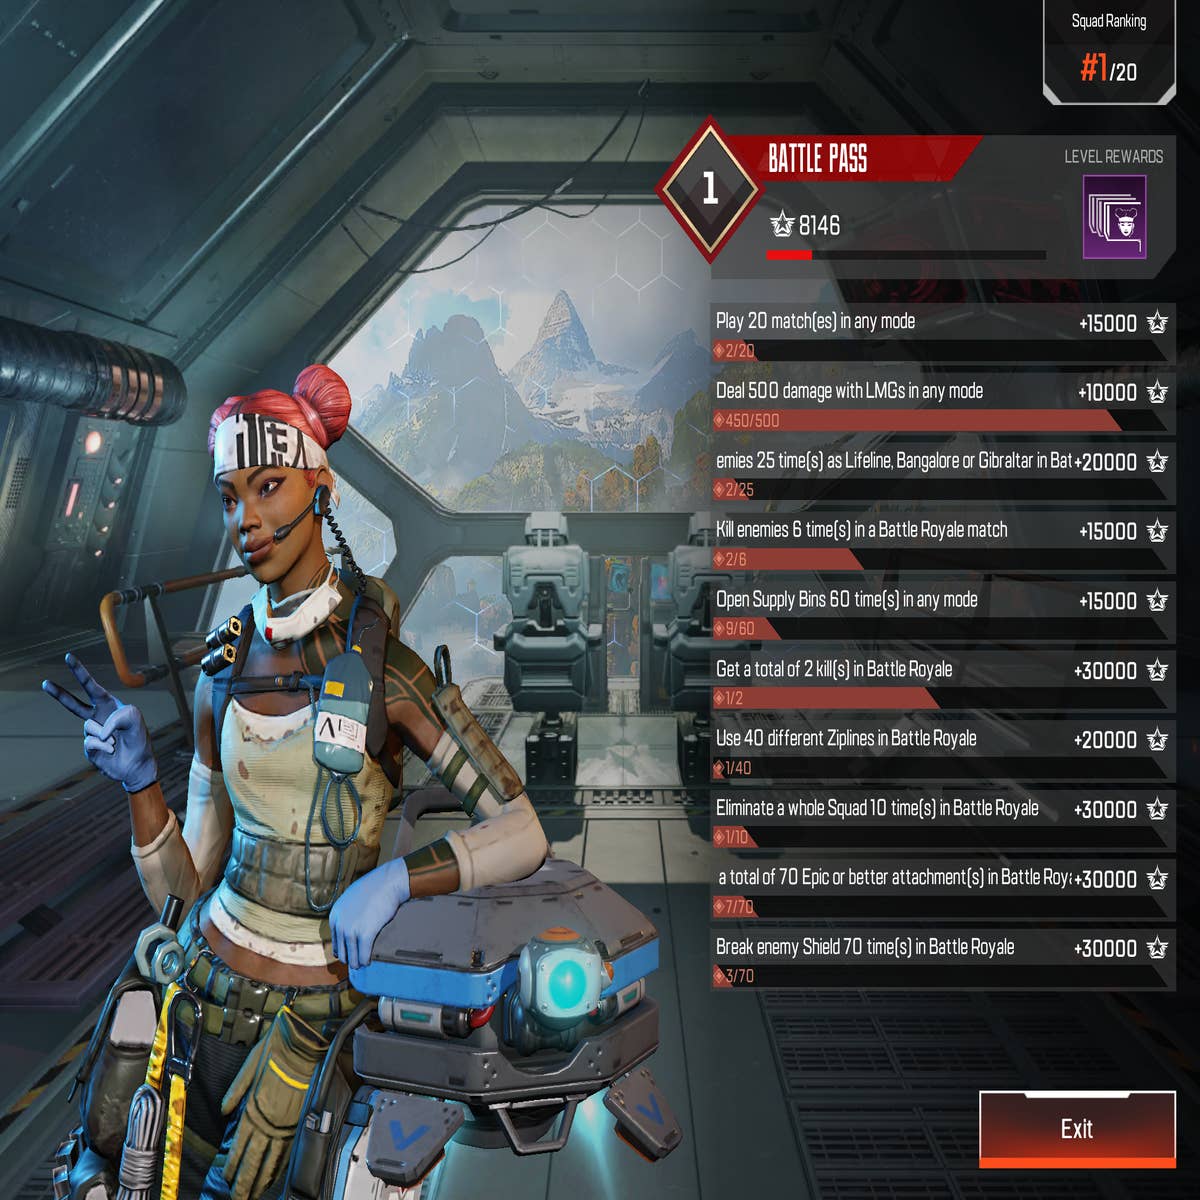 Review] Apex Legends Mobile: Free-to-play battle royale game mechanics